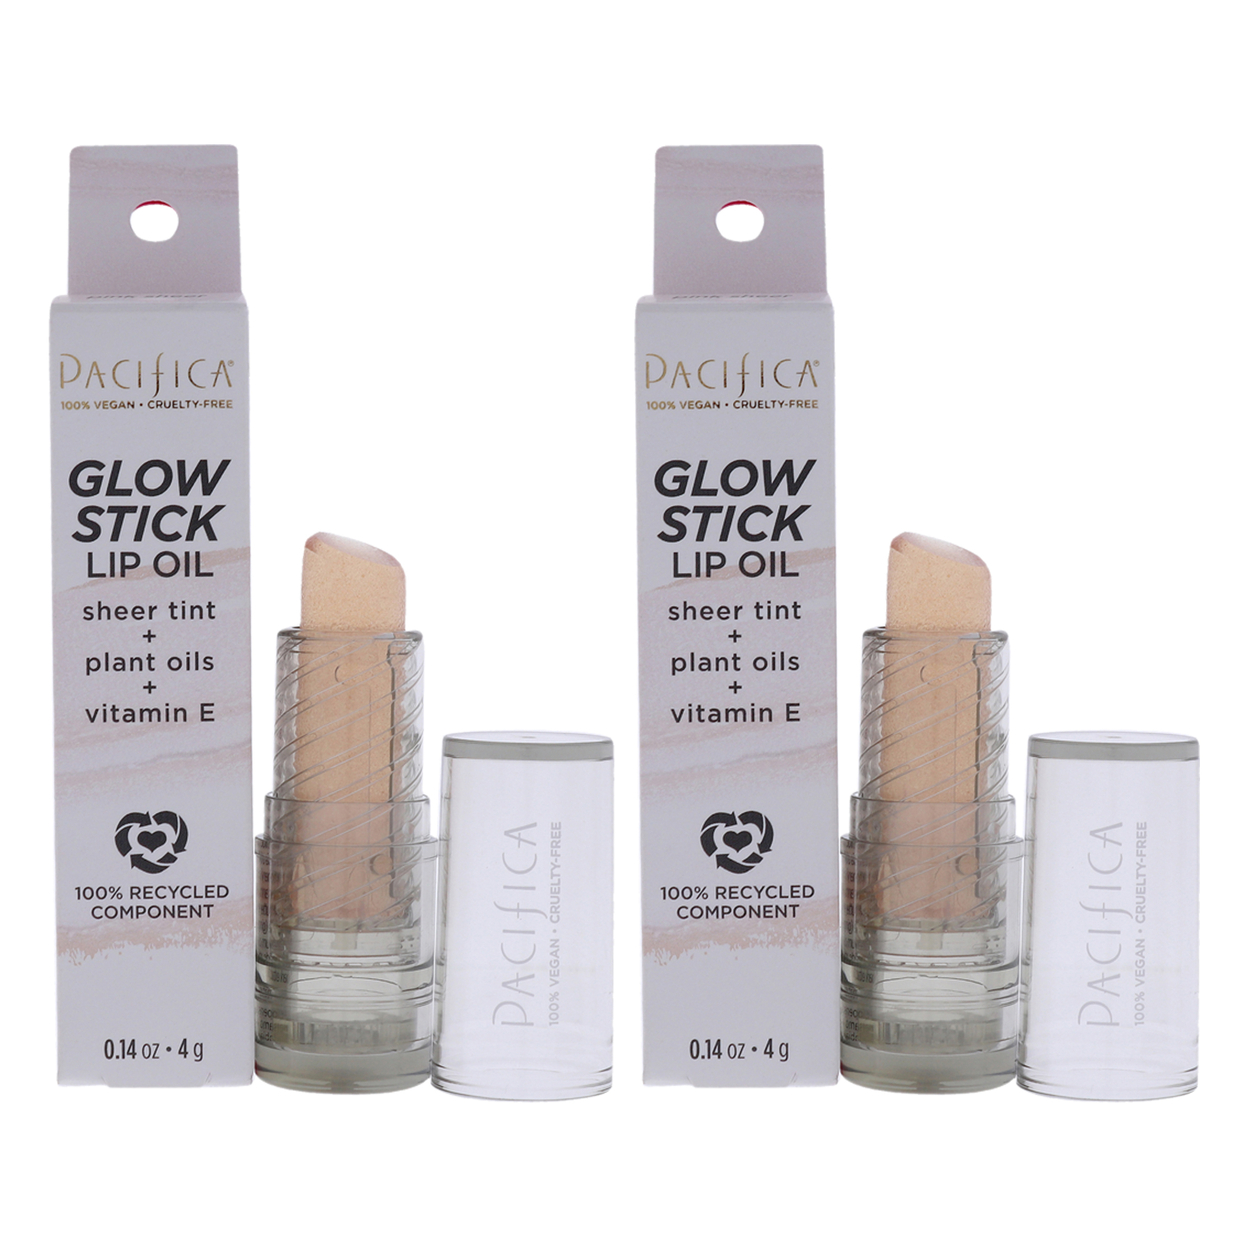 Pacifica Glow Stick Lip Oil - Pink Sheer - Pack Of 2 0.14 Oz